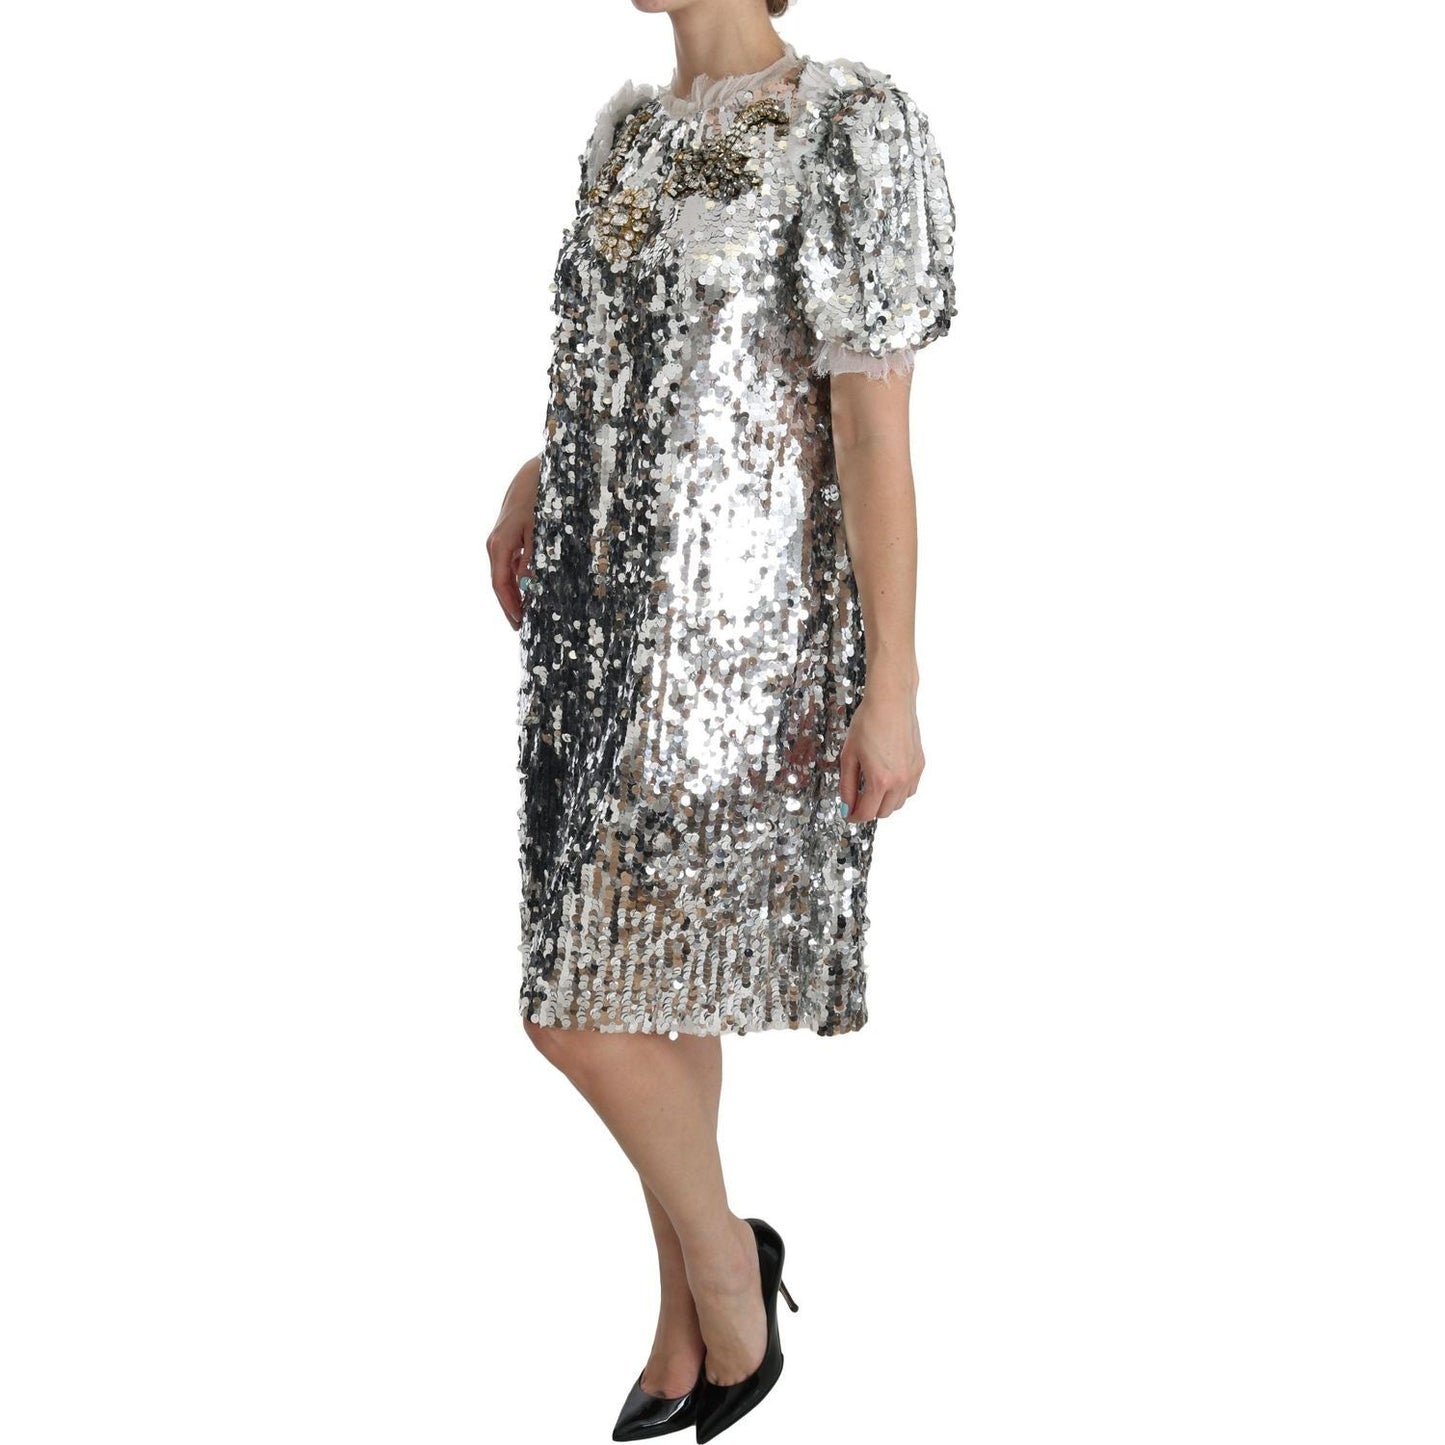 Dolce & Gabbana Elegant Silver A-Line Dress with Crystal Accents silver-sequined-crystal-shift-gown-dress